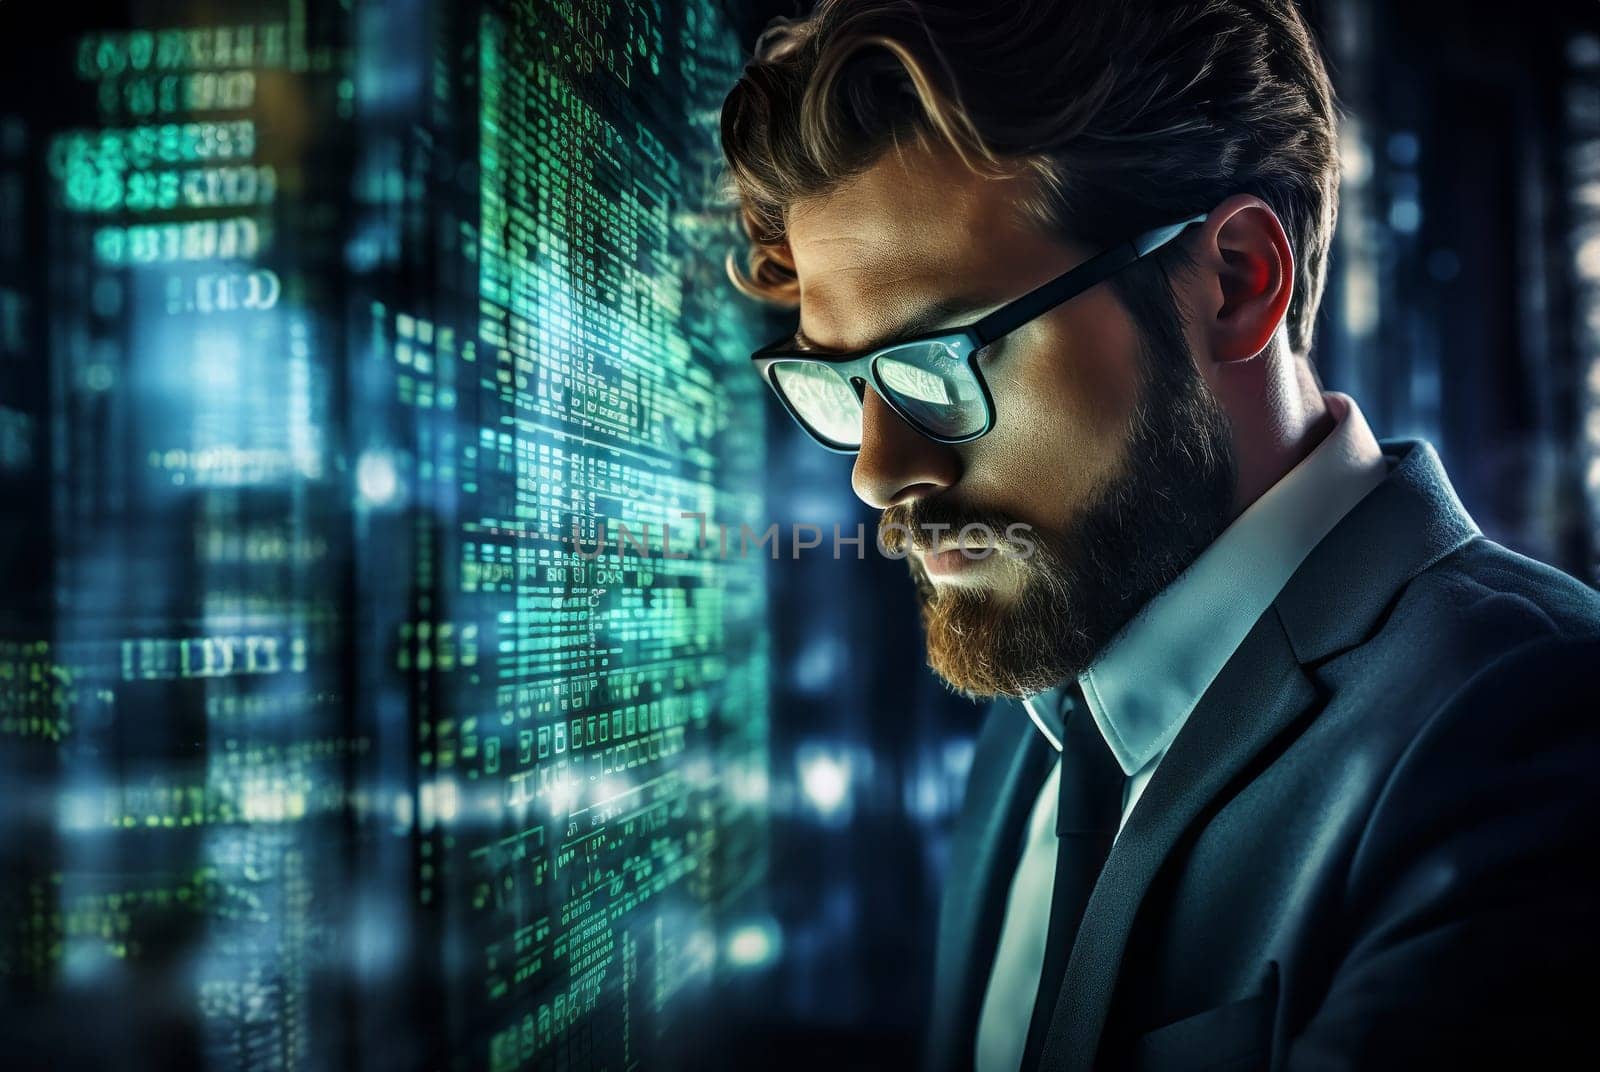 A hacker, surrounded by technological holograms, intensely focuses on coding in a close-up shot, portraying a futuristic cyber atmosphere.Generated image by dotshock